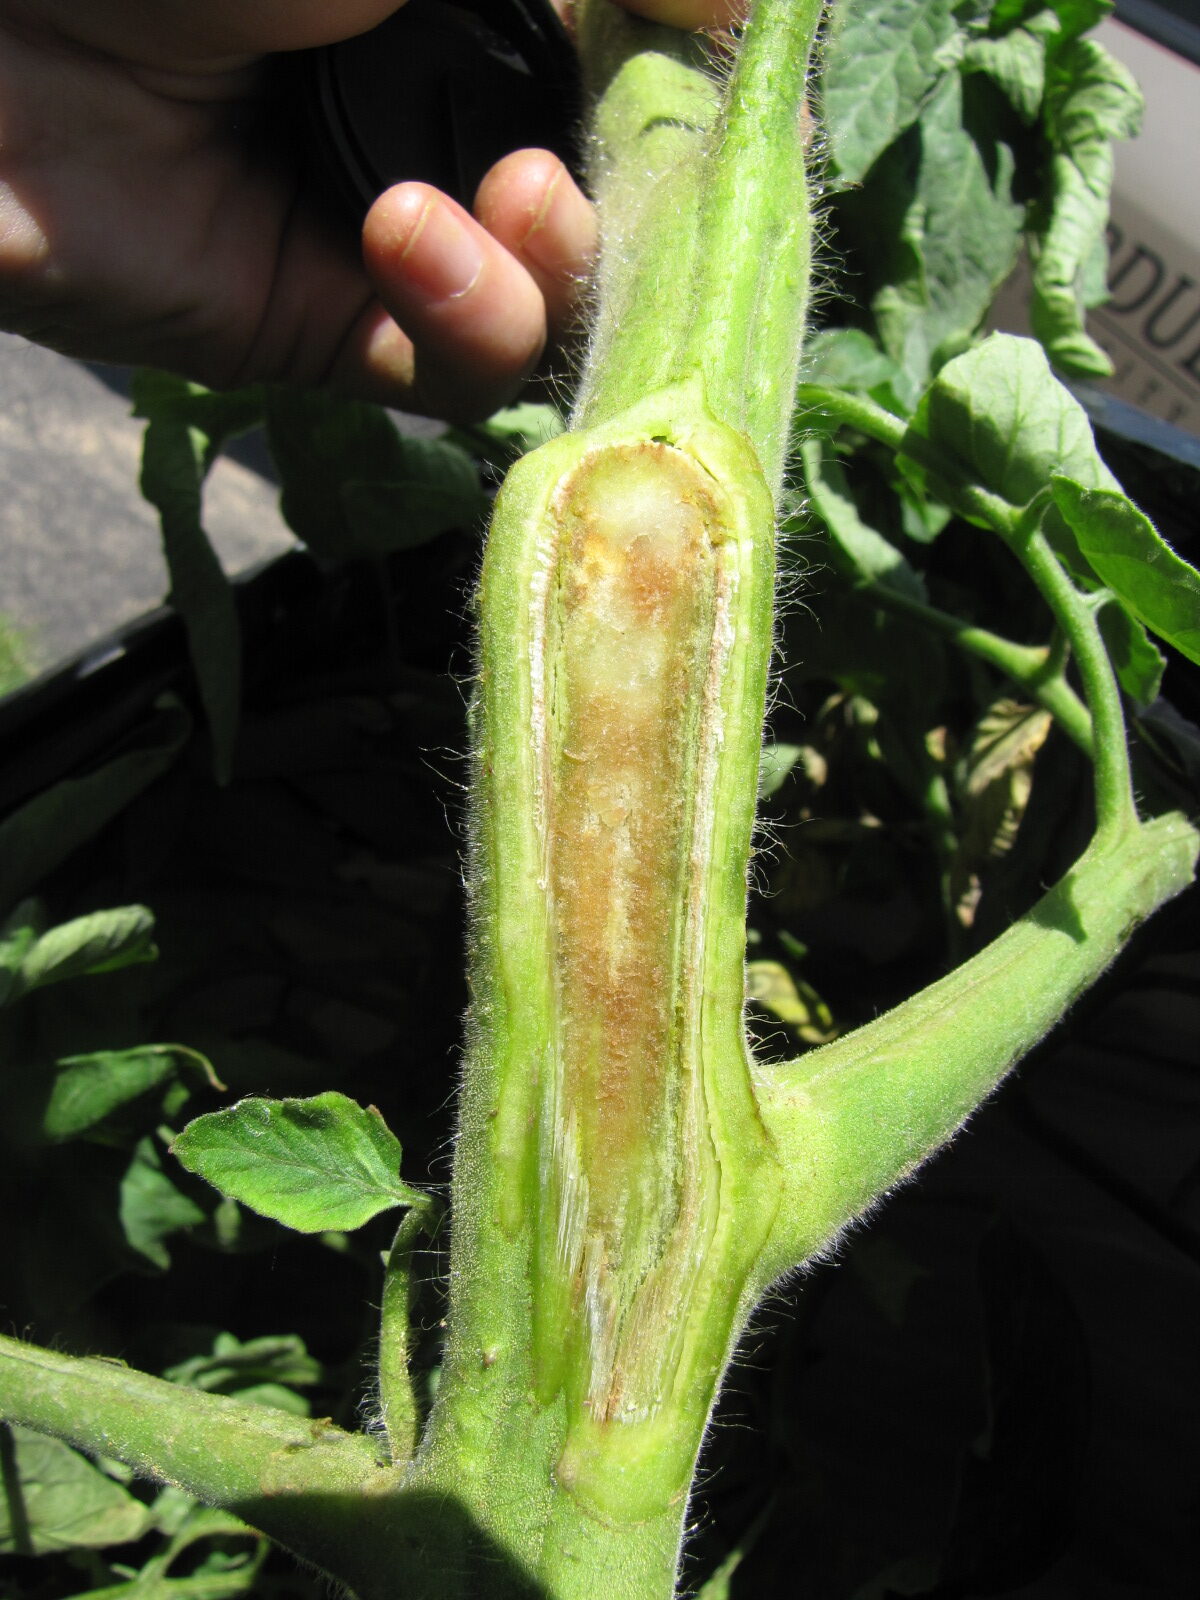 Figure 4. Vascular discoloration of tomato stem due to bacterial canker